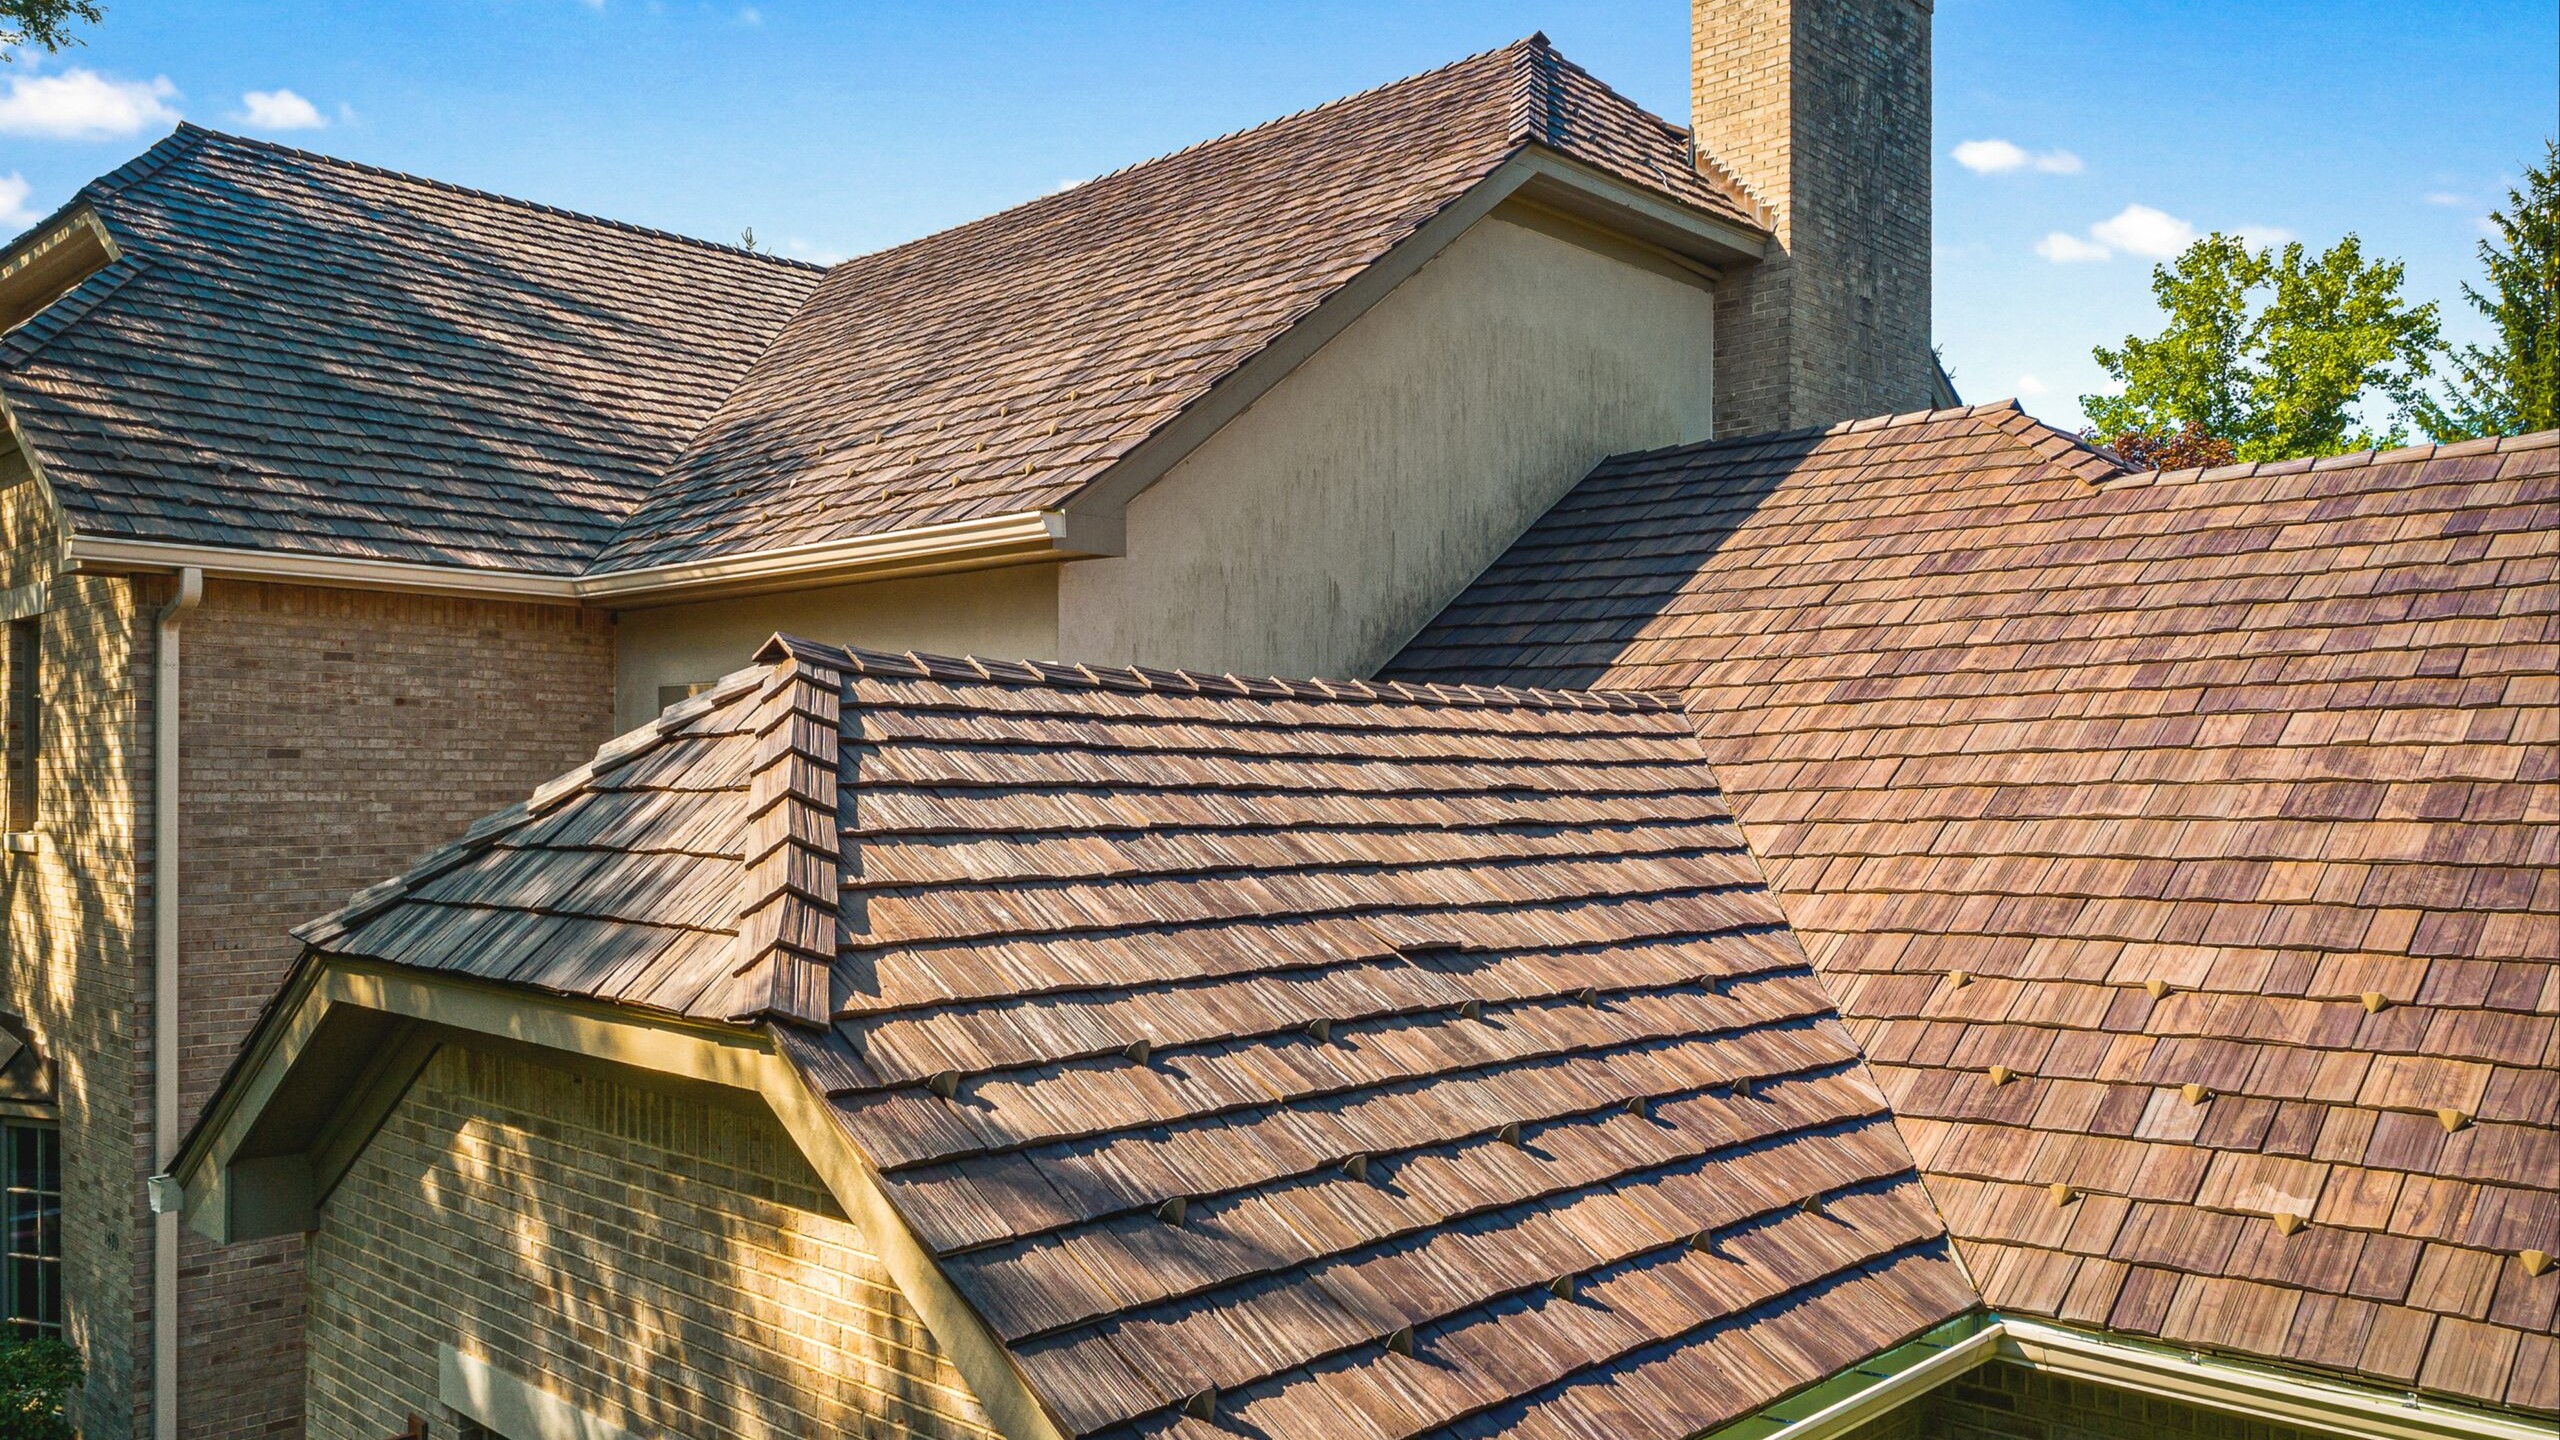 Residential roof with cedar shake tiles